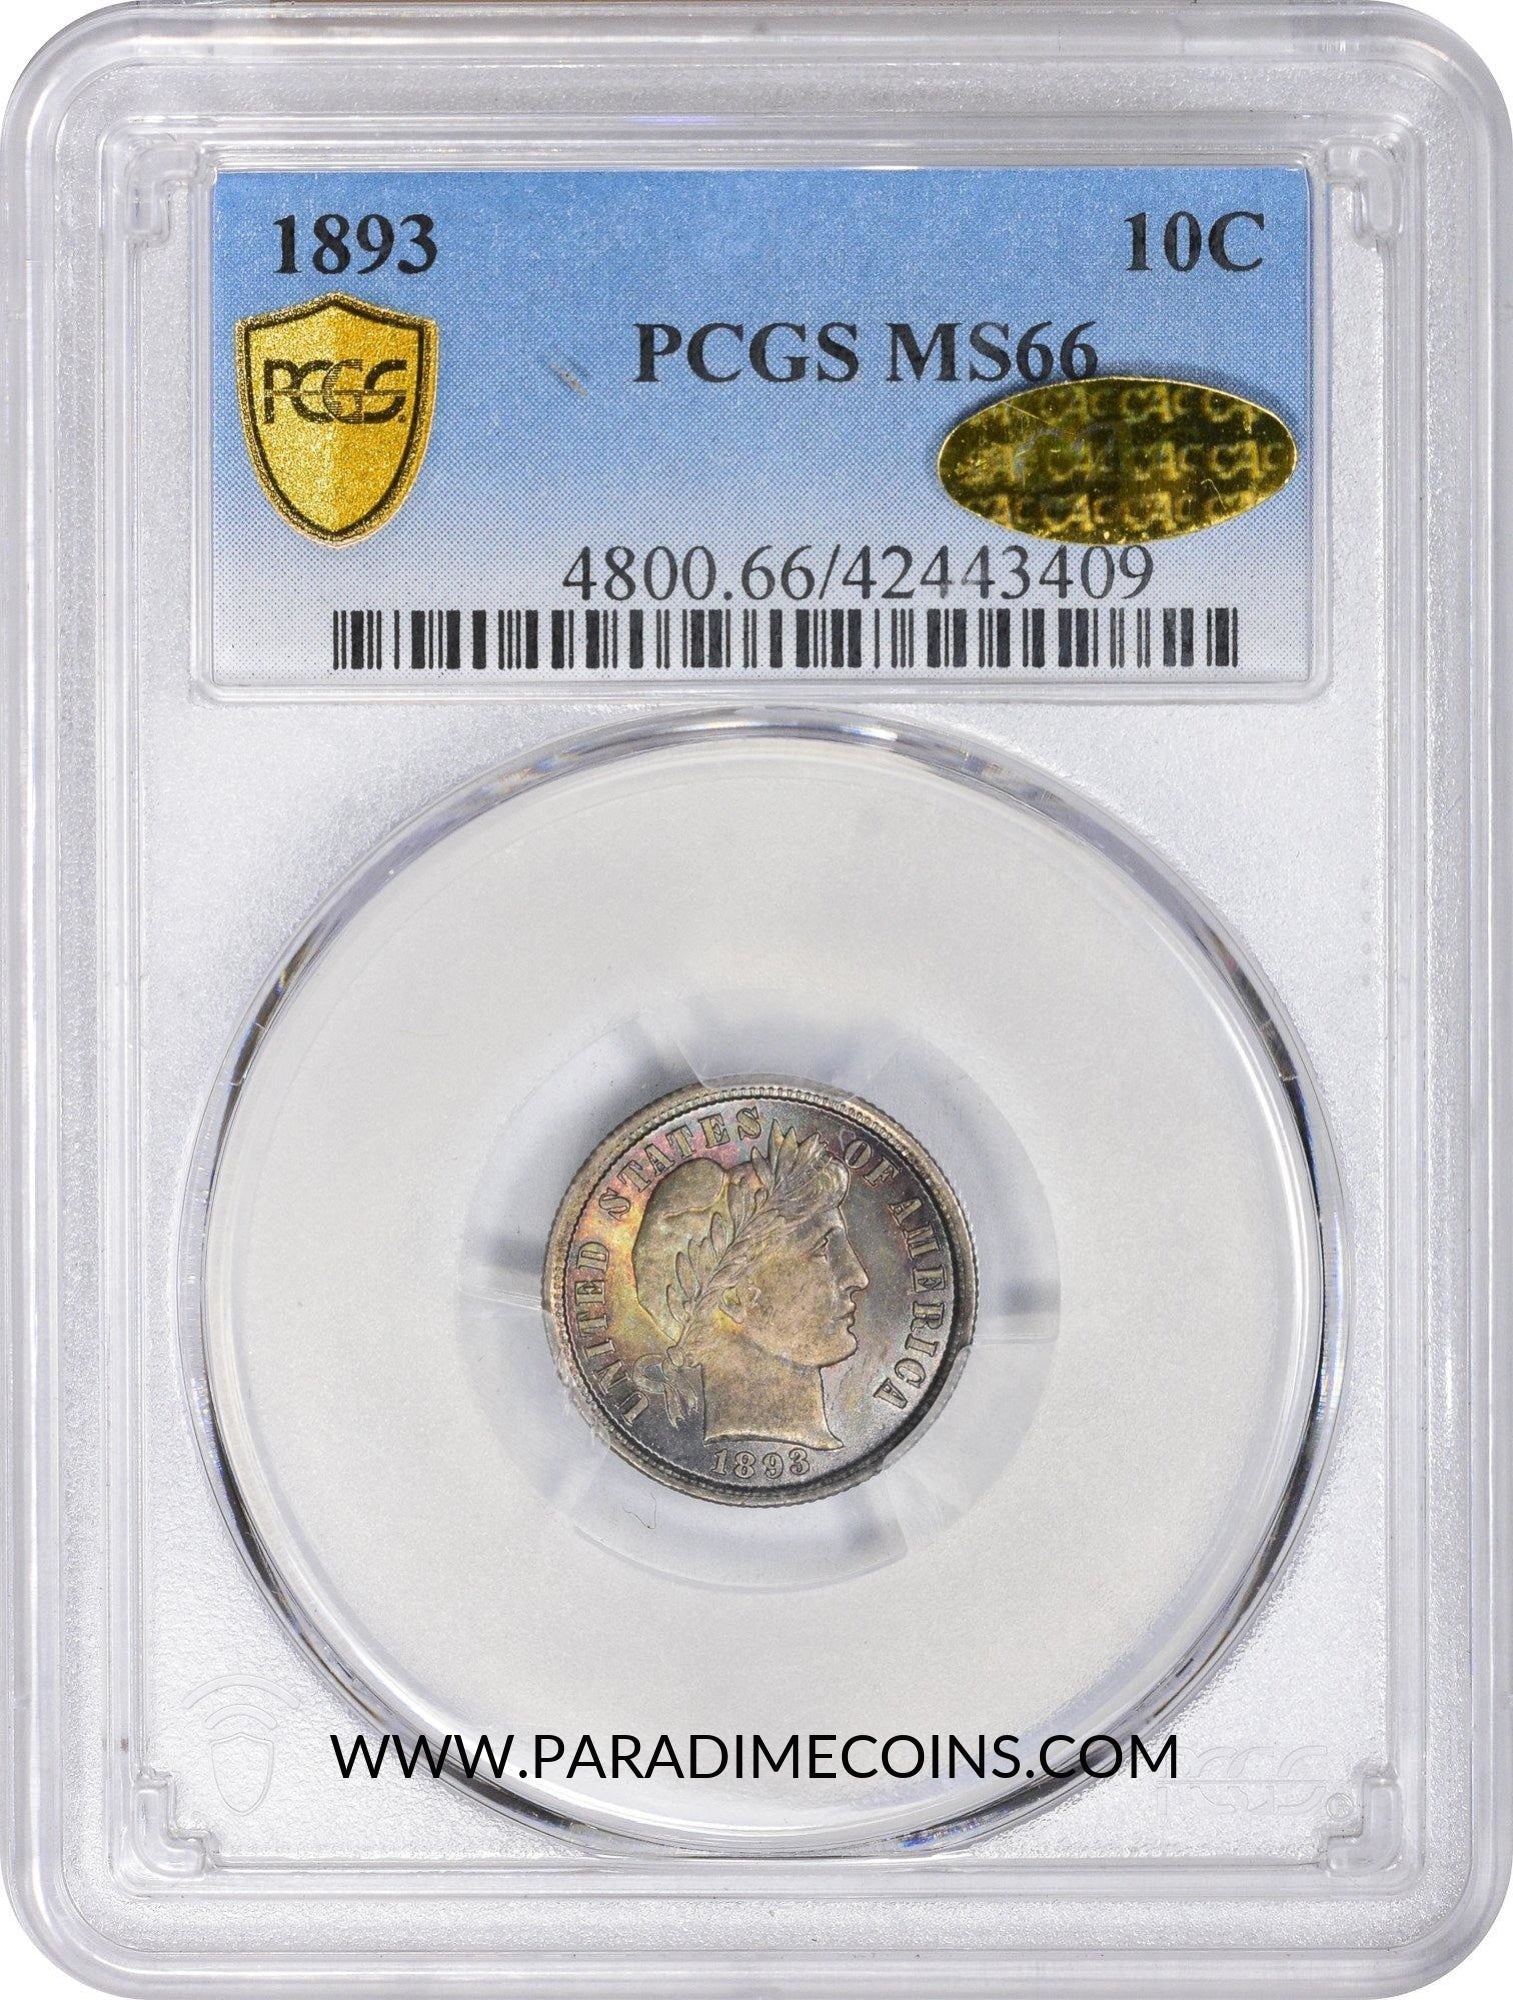 1893 10C MS66 PCGS GOLD CAC - Paradime Coins | PCGS NGC CACG CAC Rare US Numismatic Coins For Sale